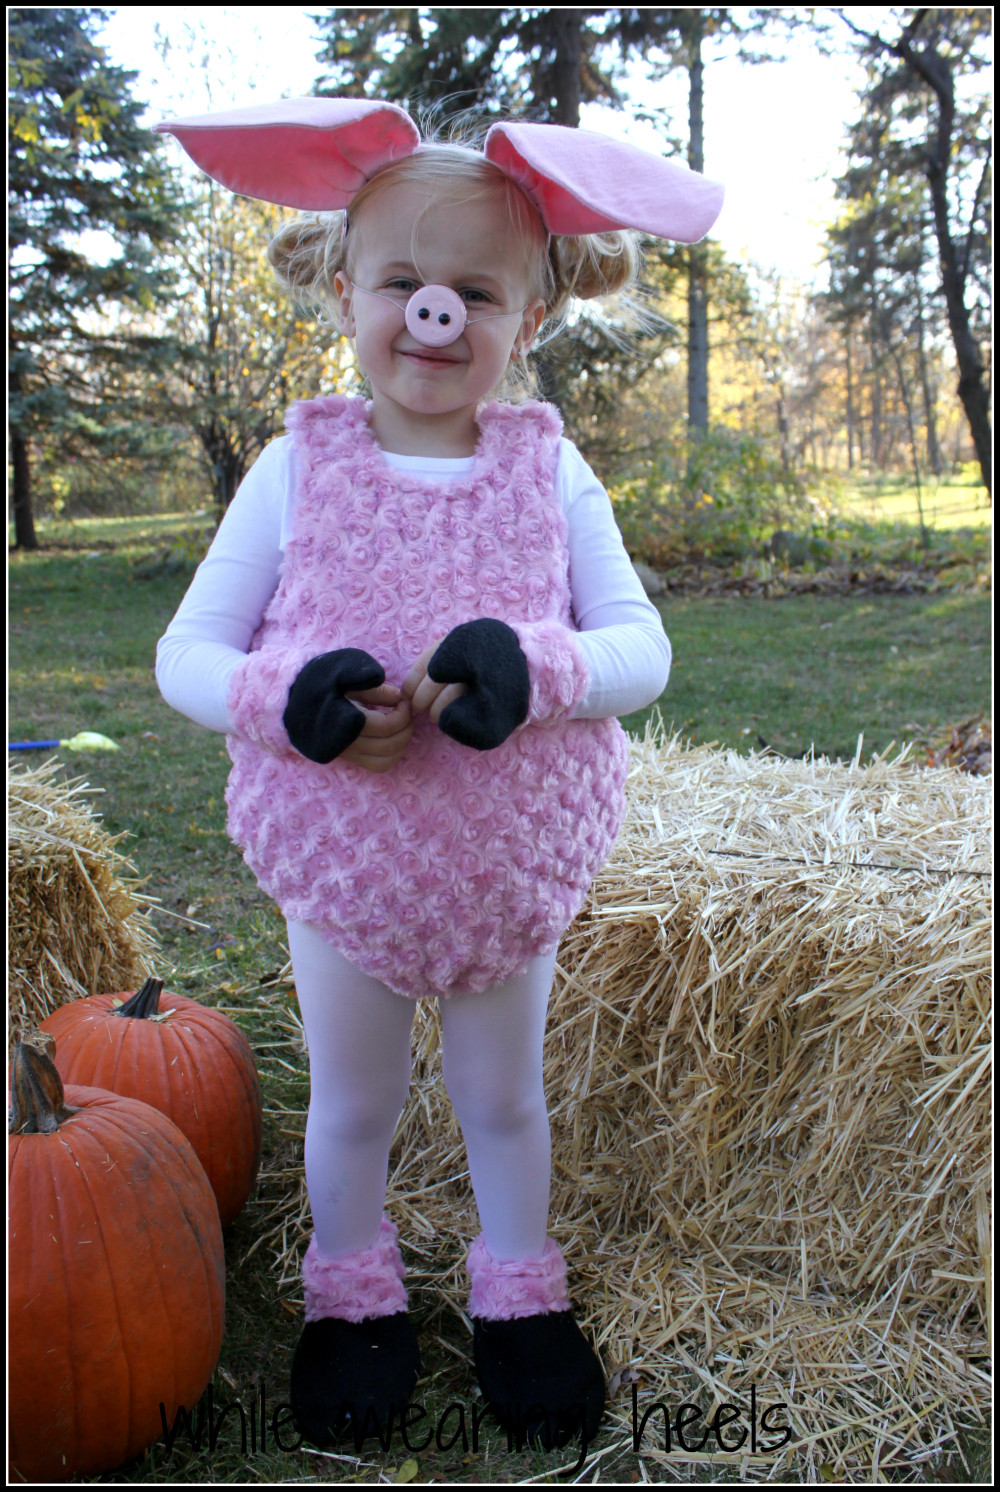 DIY Pig Costume
 While Wearing Heels This Little Piggy Went Trick or Treating